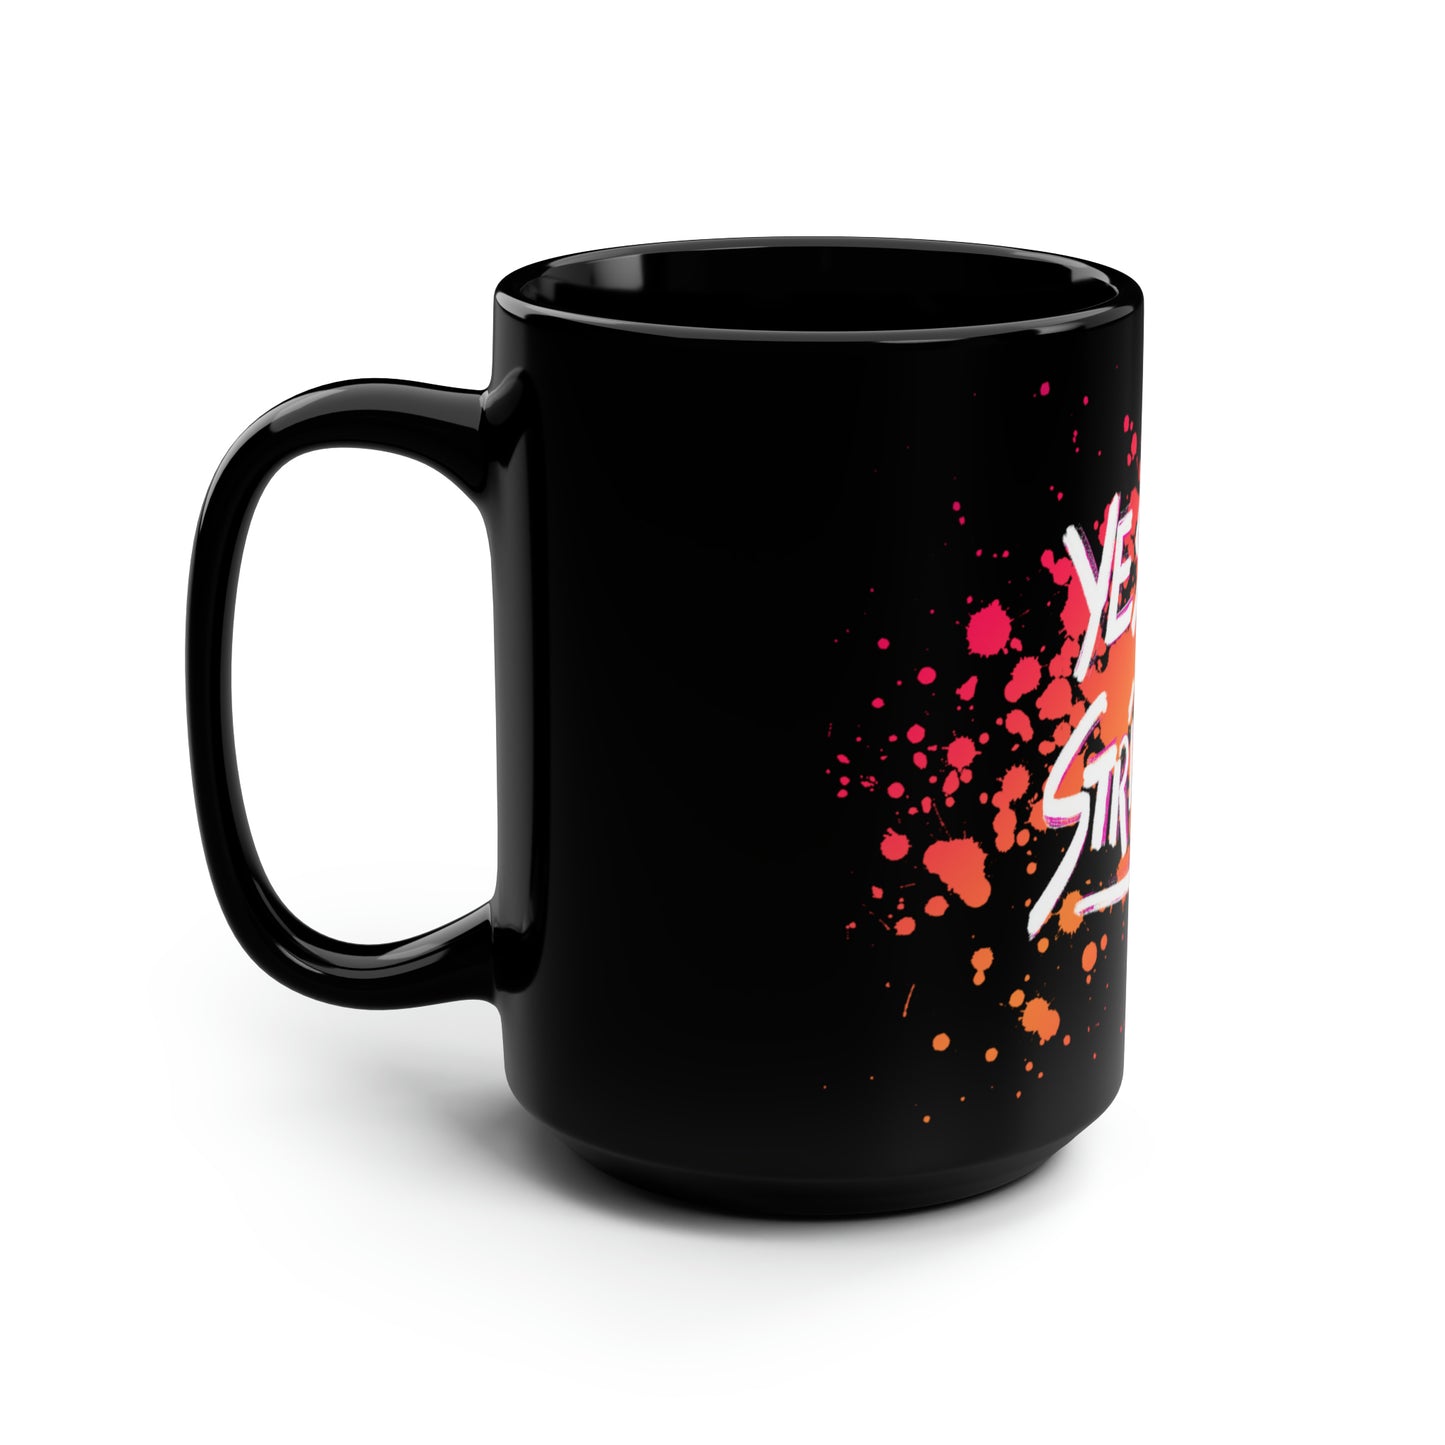 Yes, a Stripper Mug CORAL Paint